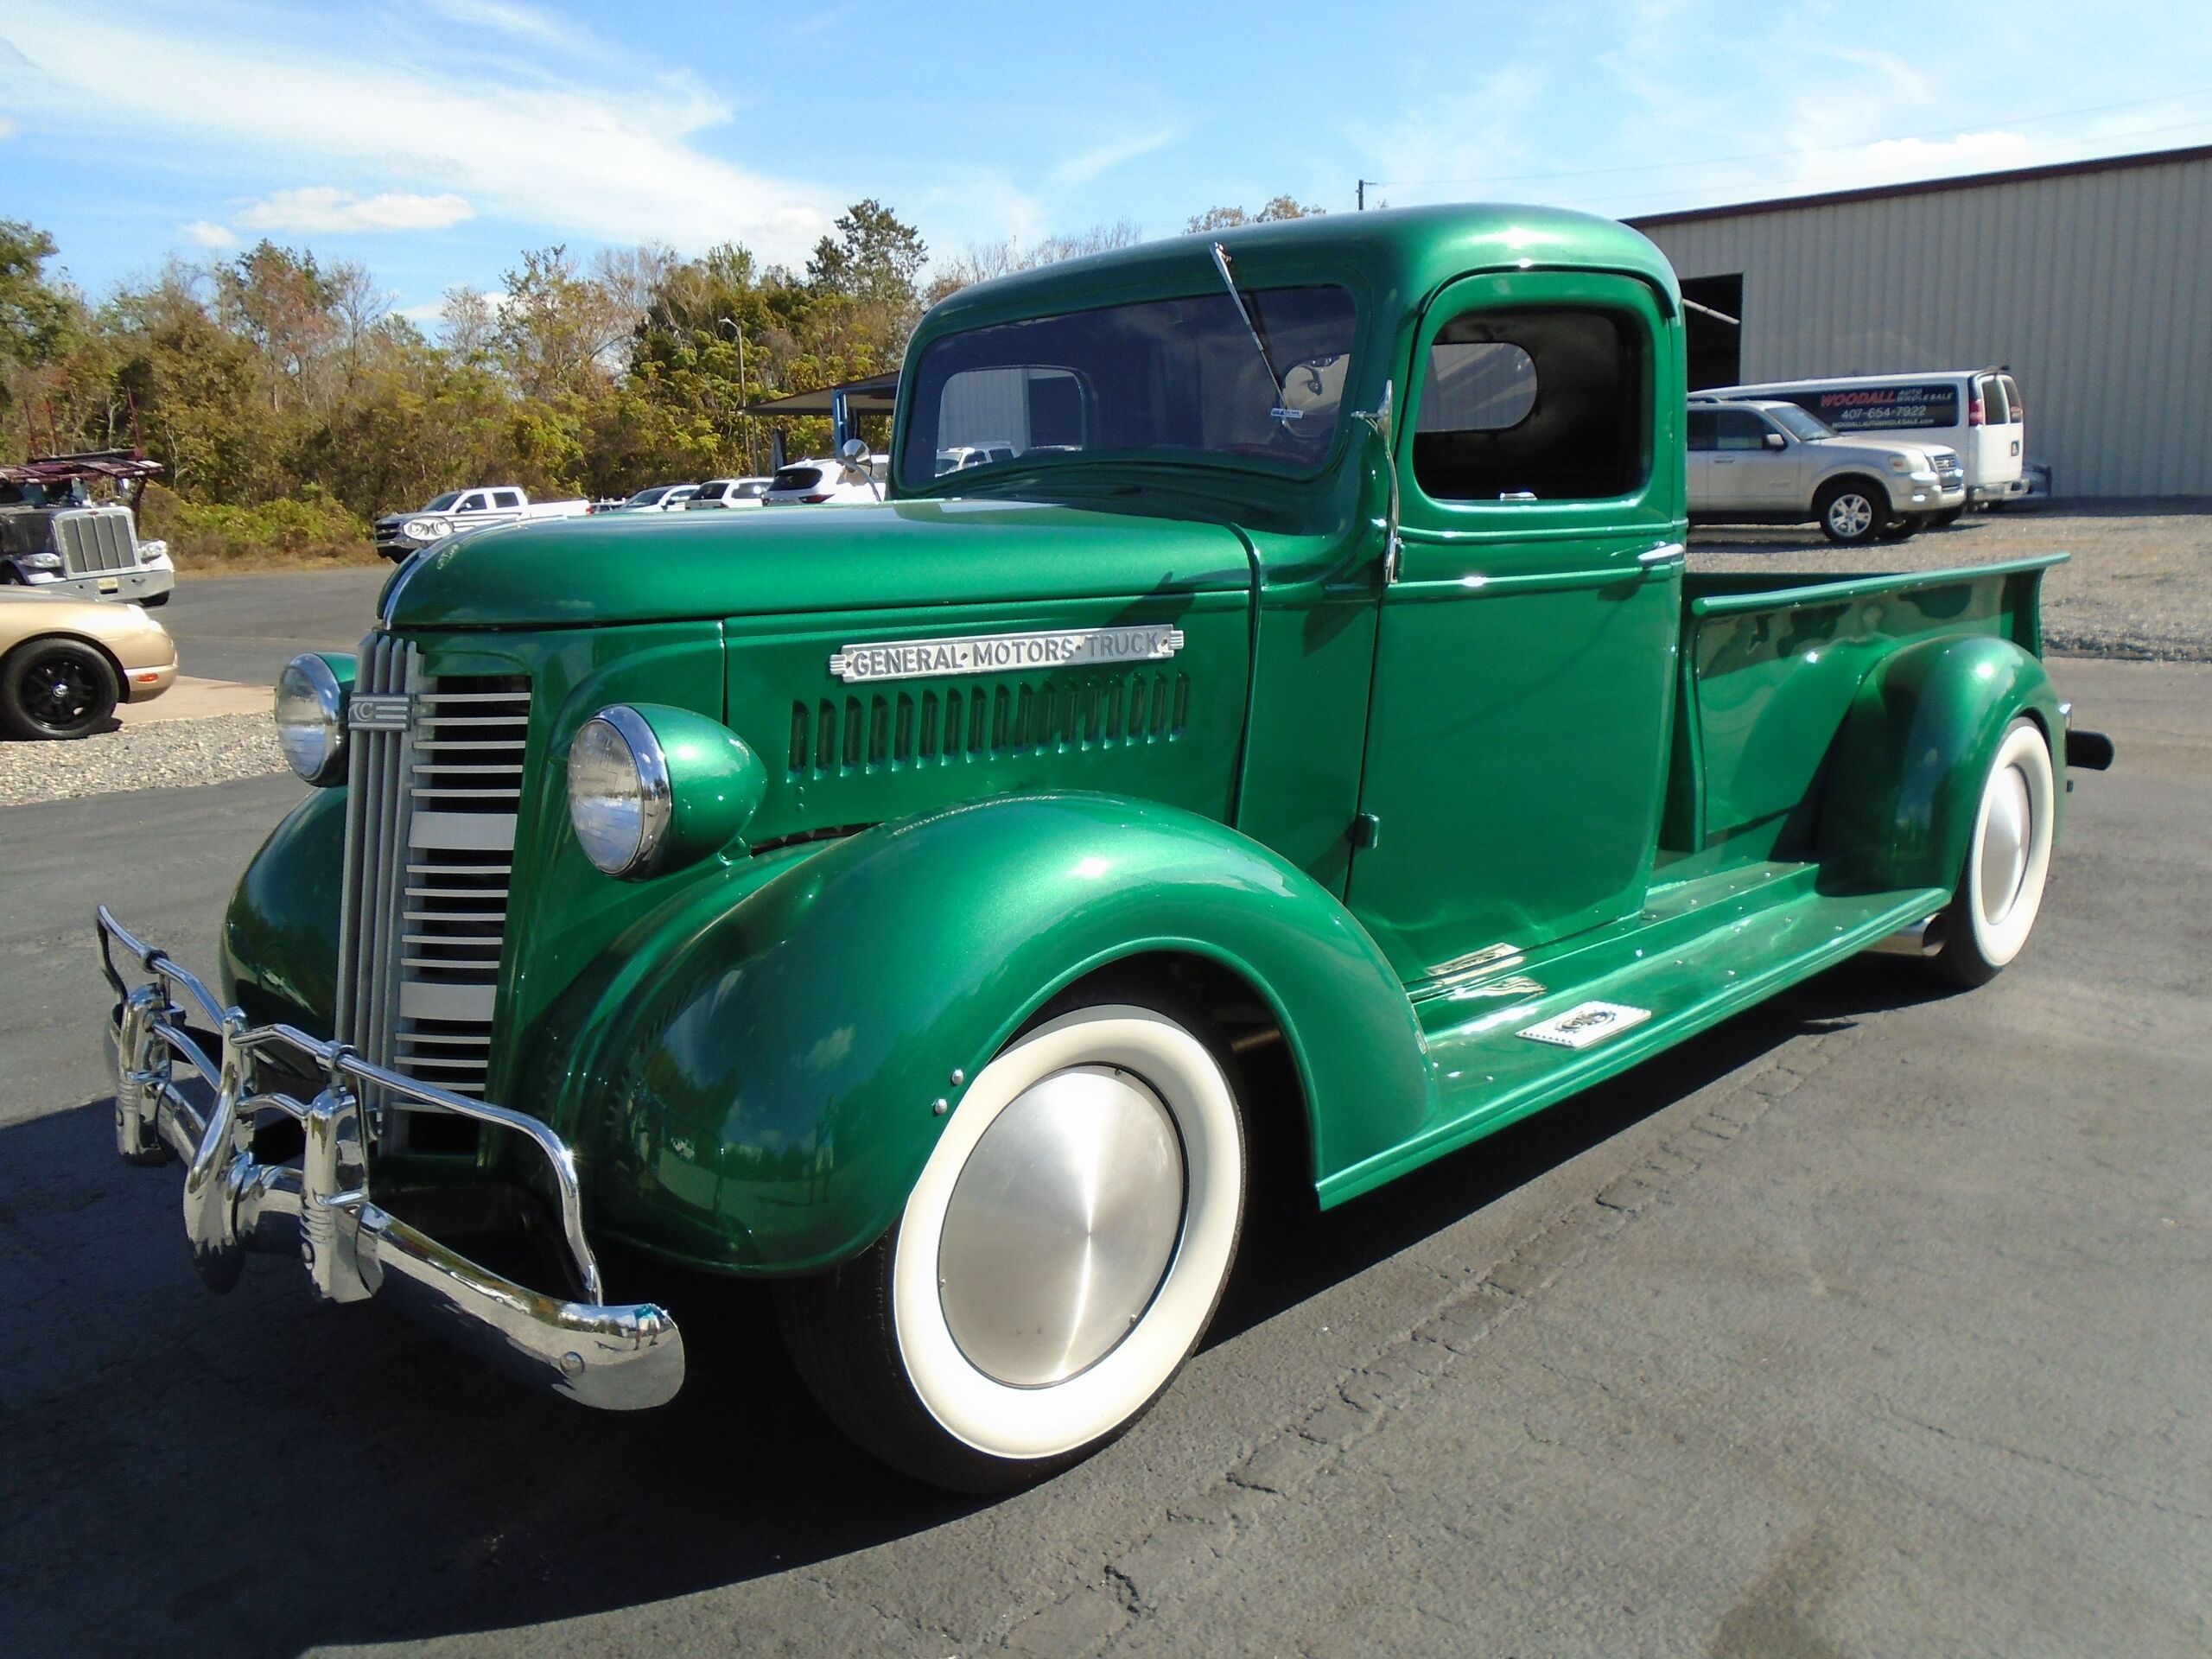 1937 GMC  Long bed  (Longbeds are rare) 1